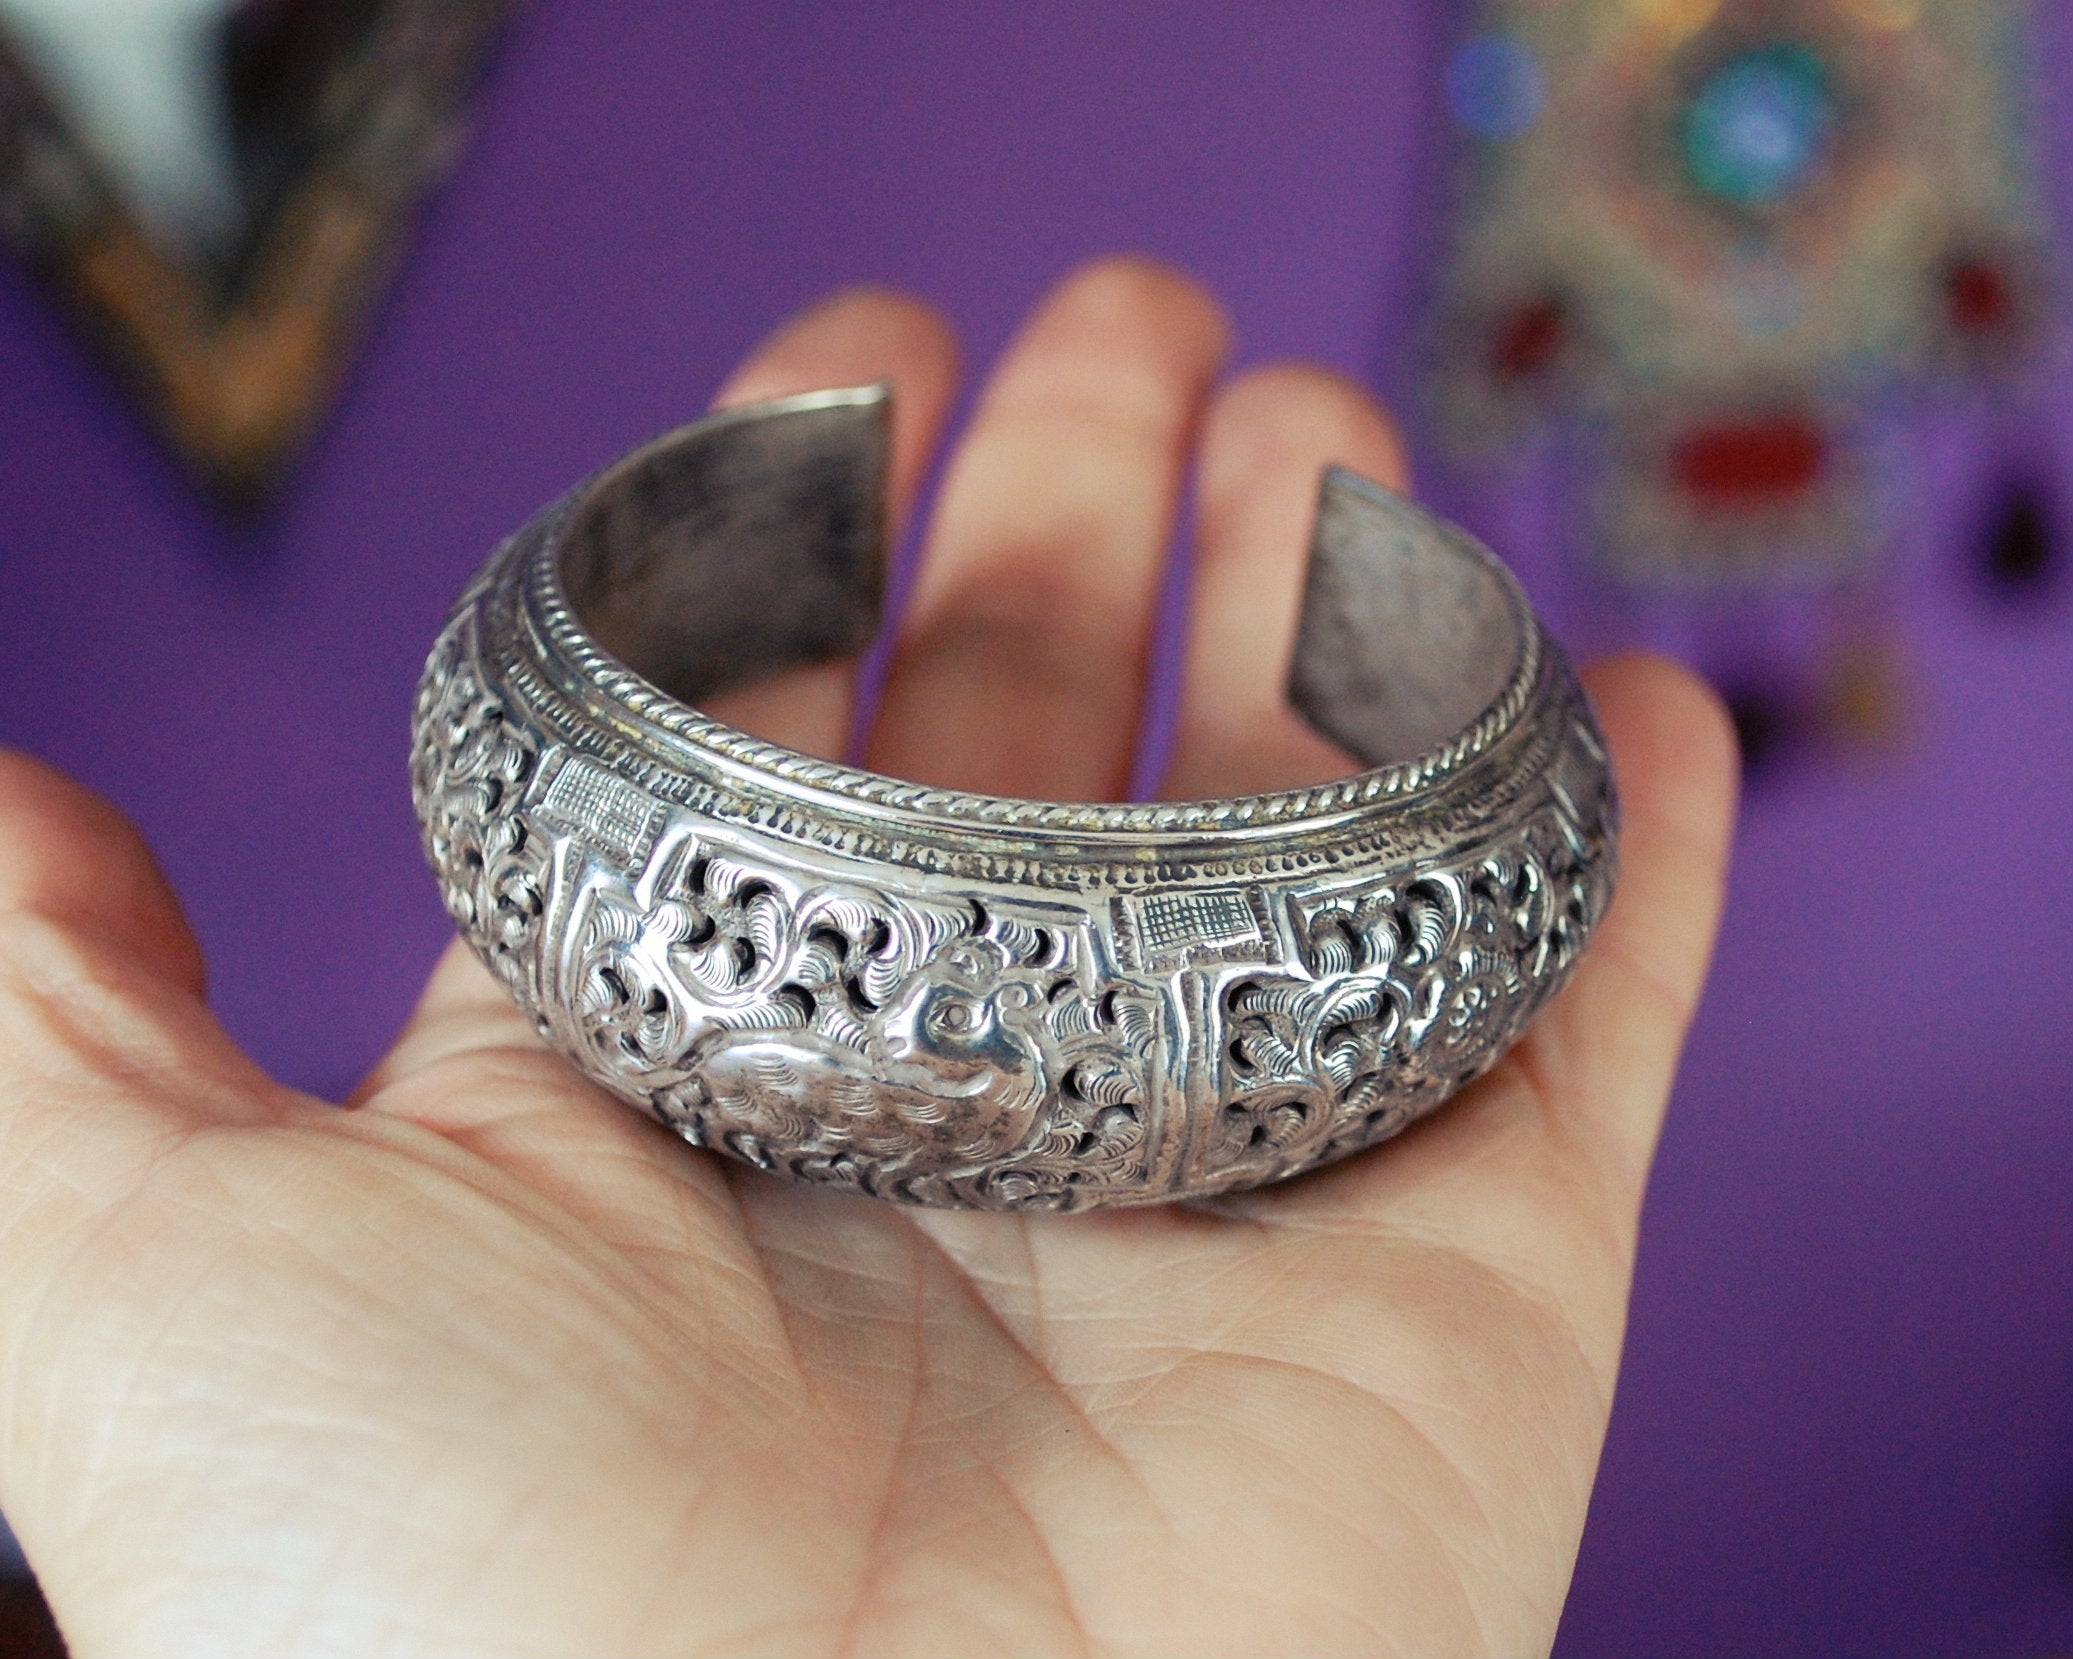 Nepali Repoussee Bracelet with Deer